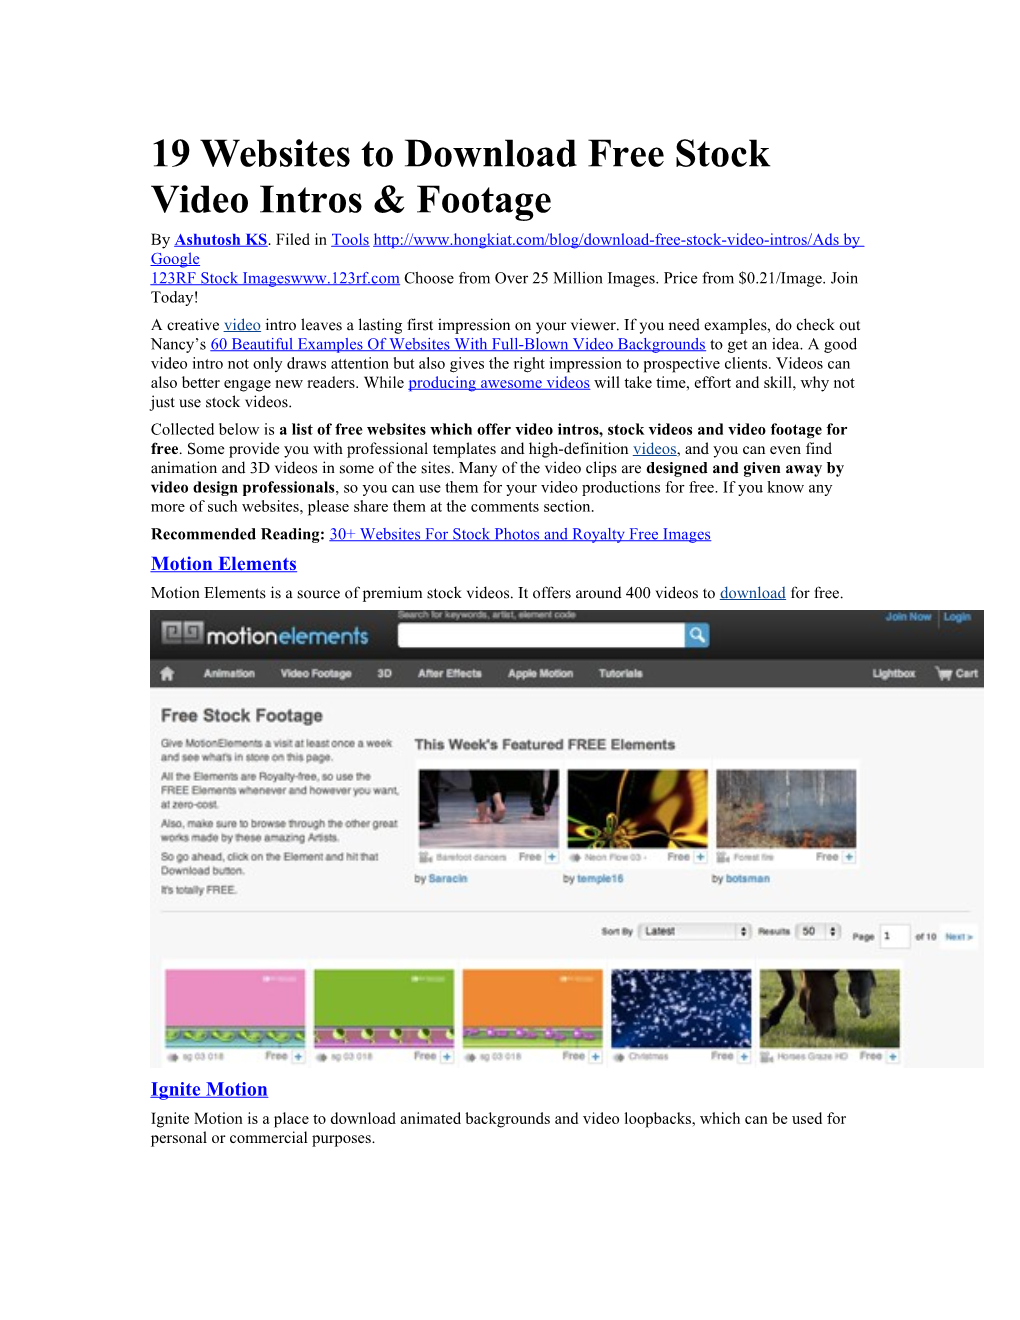 19 Websites to Download Free Stock Video Intros & Footage